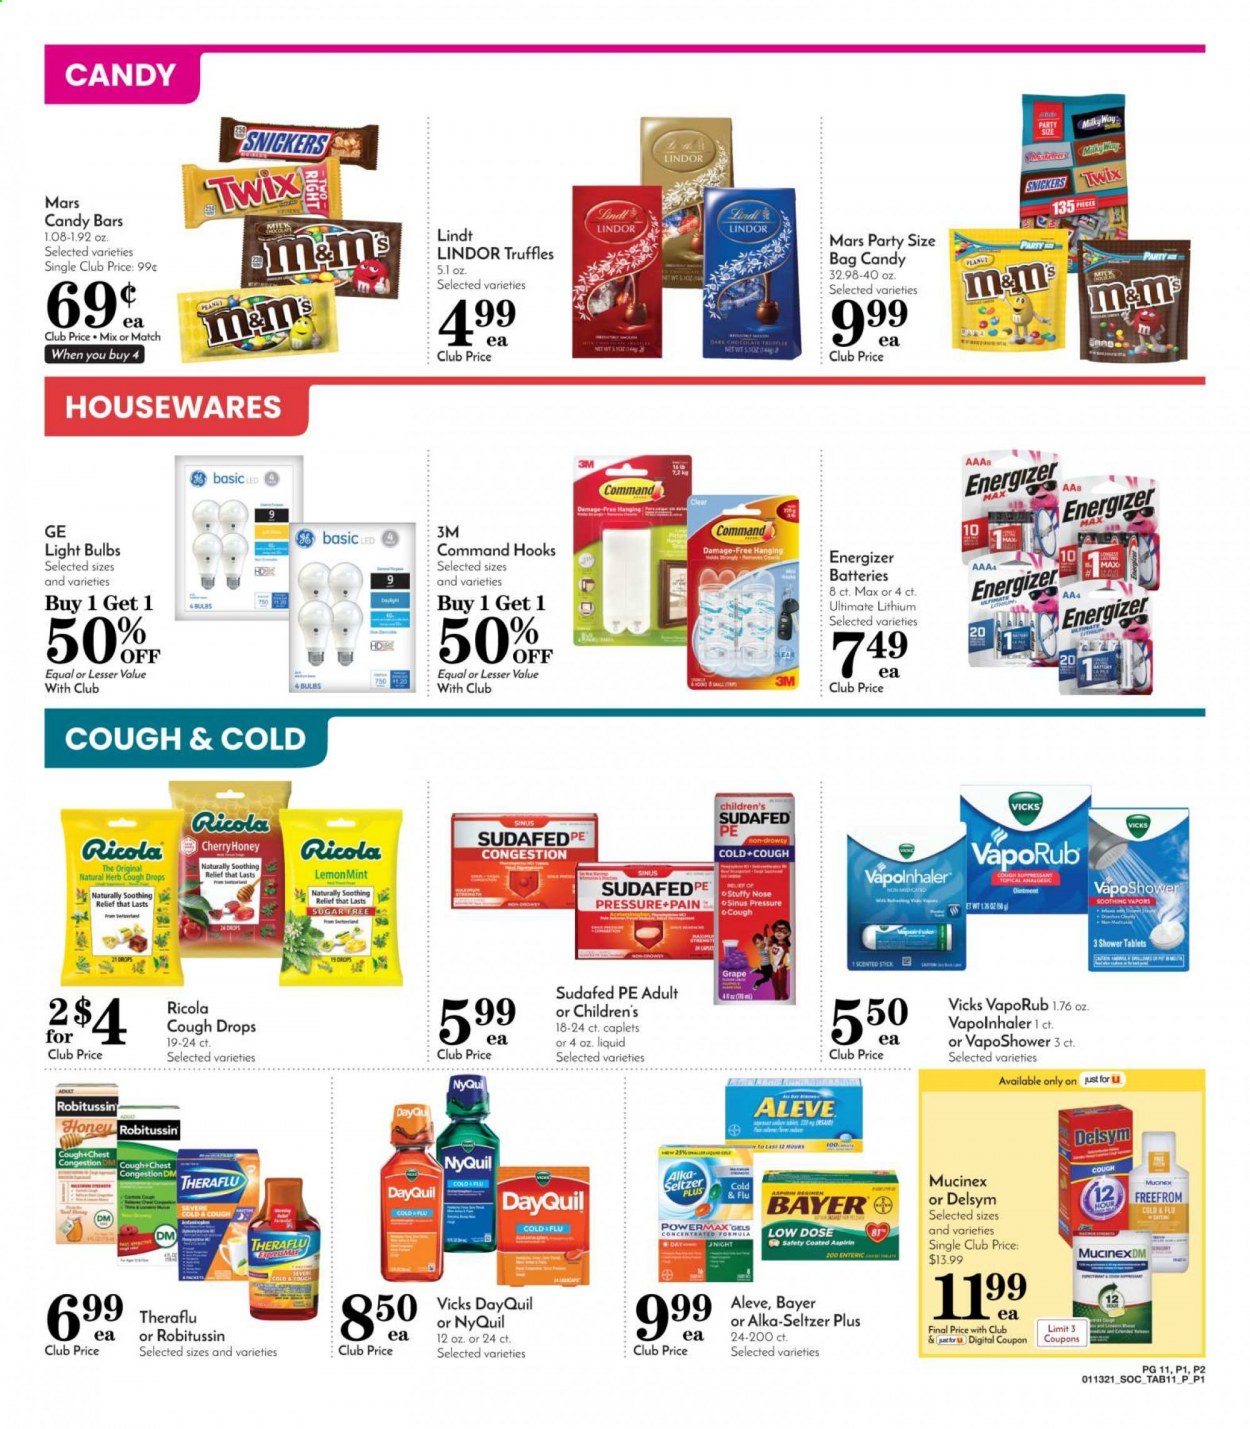 thumbnail - Pavilions Flyer - 01/13/2021 - 01/19/2021 - Sales products - ricola, Lindt, Lindor, Milky Way, Snickers, Twix, Mars, truffles, M&M's, herbs, honey, peanuts, seltzer water, Vicks, battery, bulb, Energizer, light bulb, bag, Aleve, DayQuil, Delsym, Cold & Flu, Mucinex, Robitussin, Sudafed, Theraflu, NyQuil, Alka-seltzer, VapoRub, cough drops, Low Dose, aspirin, Bayer. Page 11.